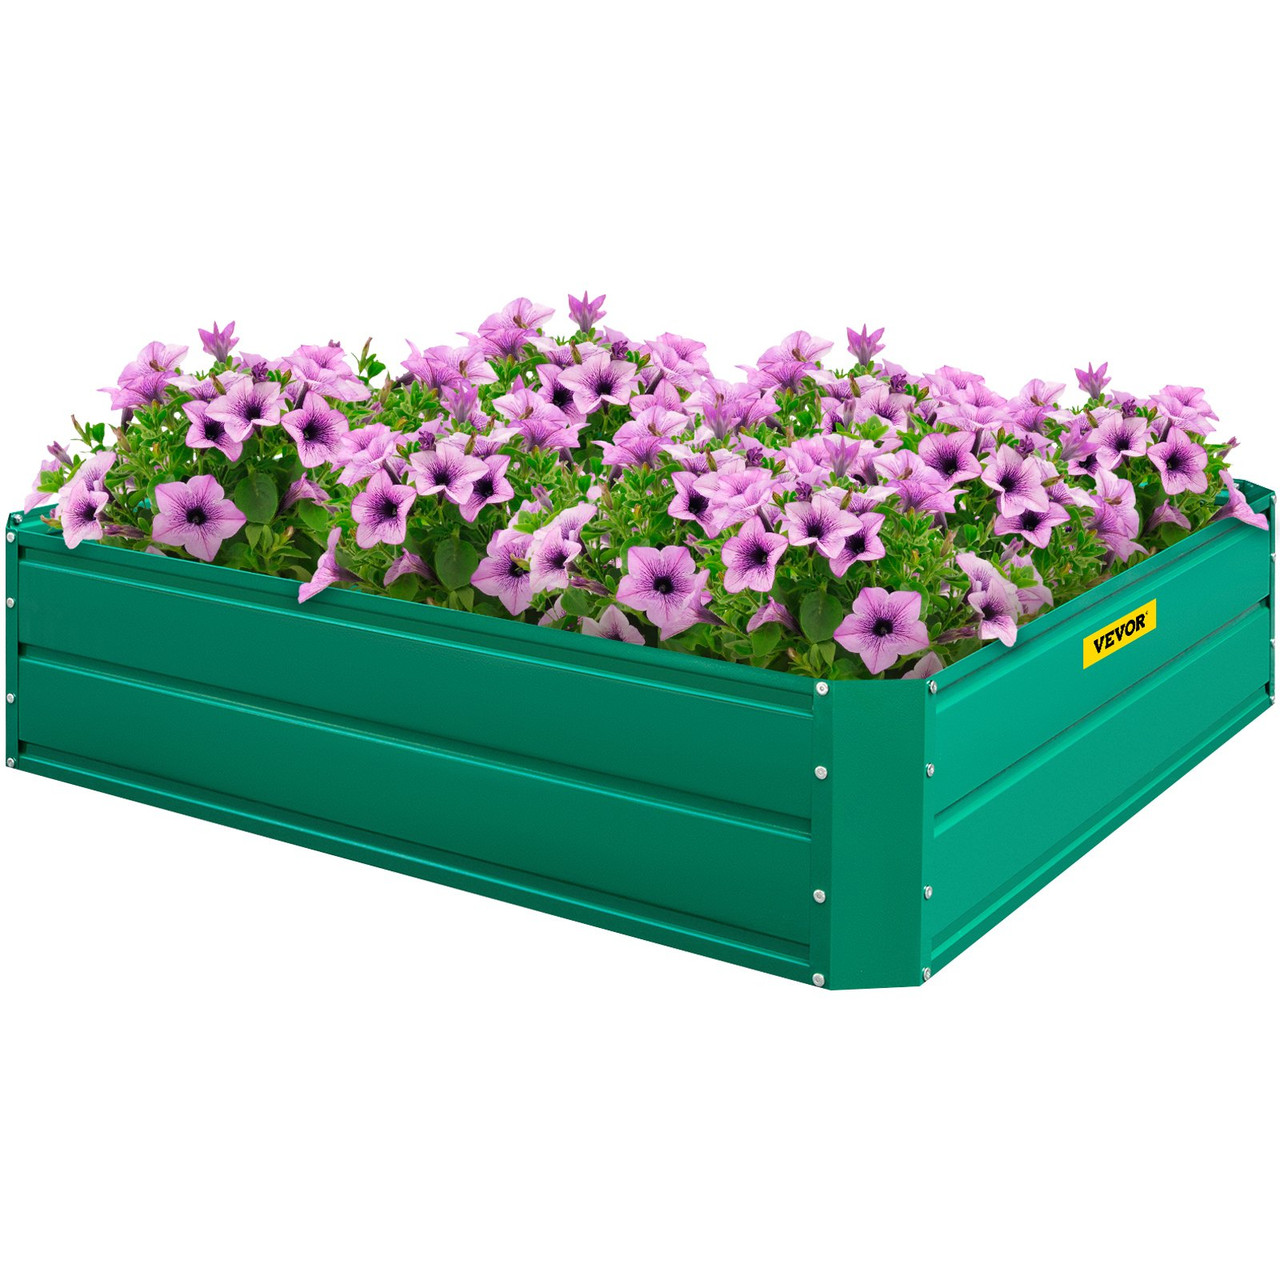 Galvanized Raised Garden Bed, 48" x 36" x 12" Metal Planter Box, Green Steel Plant Raised Garden Bed Kit, Planter Boxes Outdoor for Growing Vegetables,Flowers,Fruits,Herbs,and Succulents